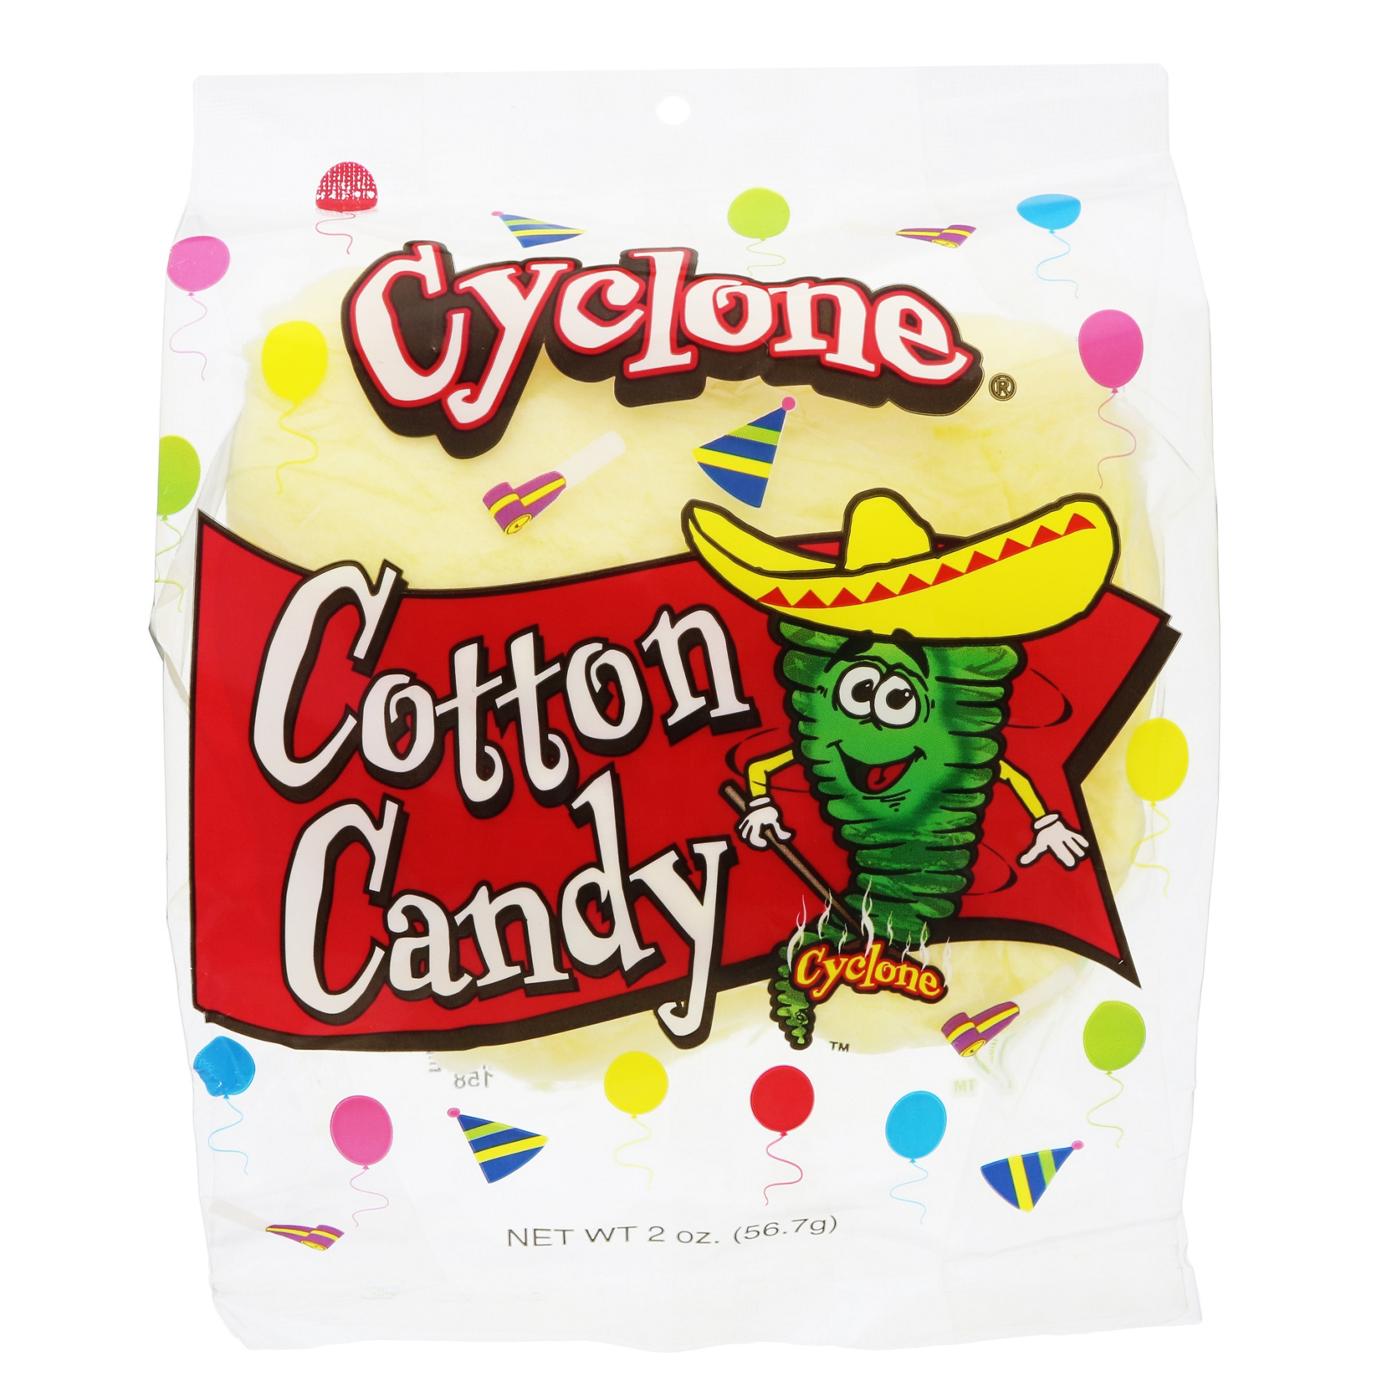 Cyclone Cotton Candy; image 3 of 3